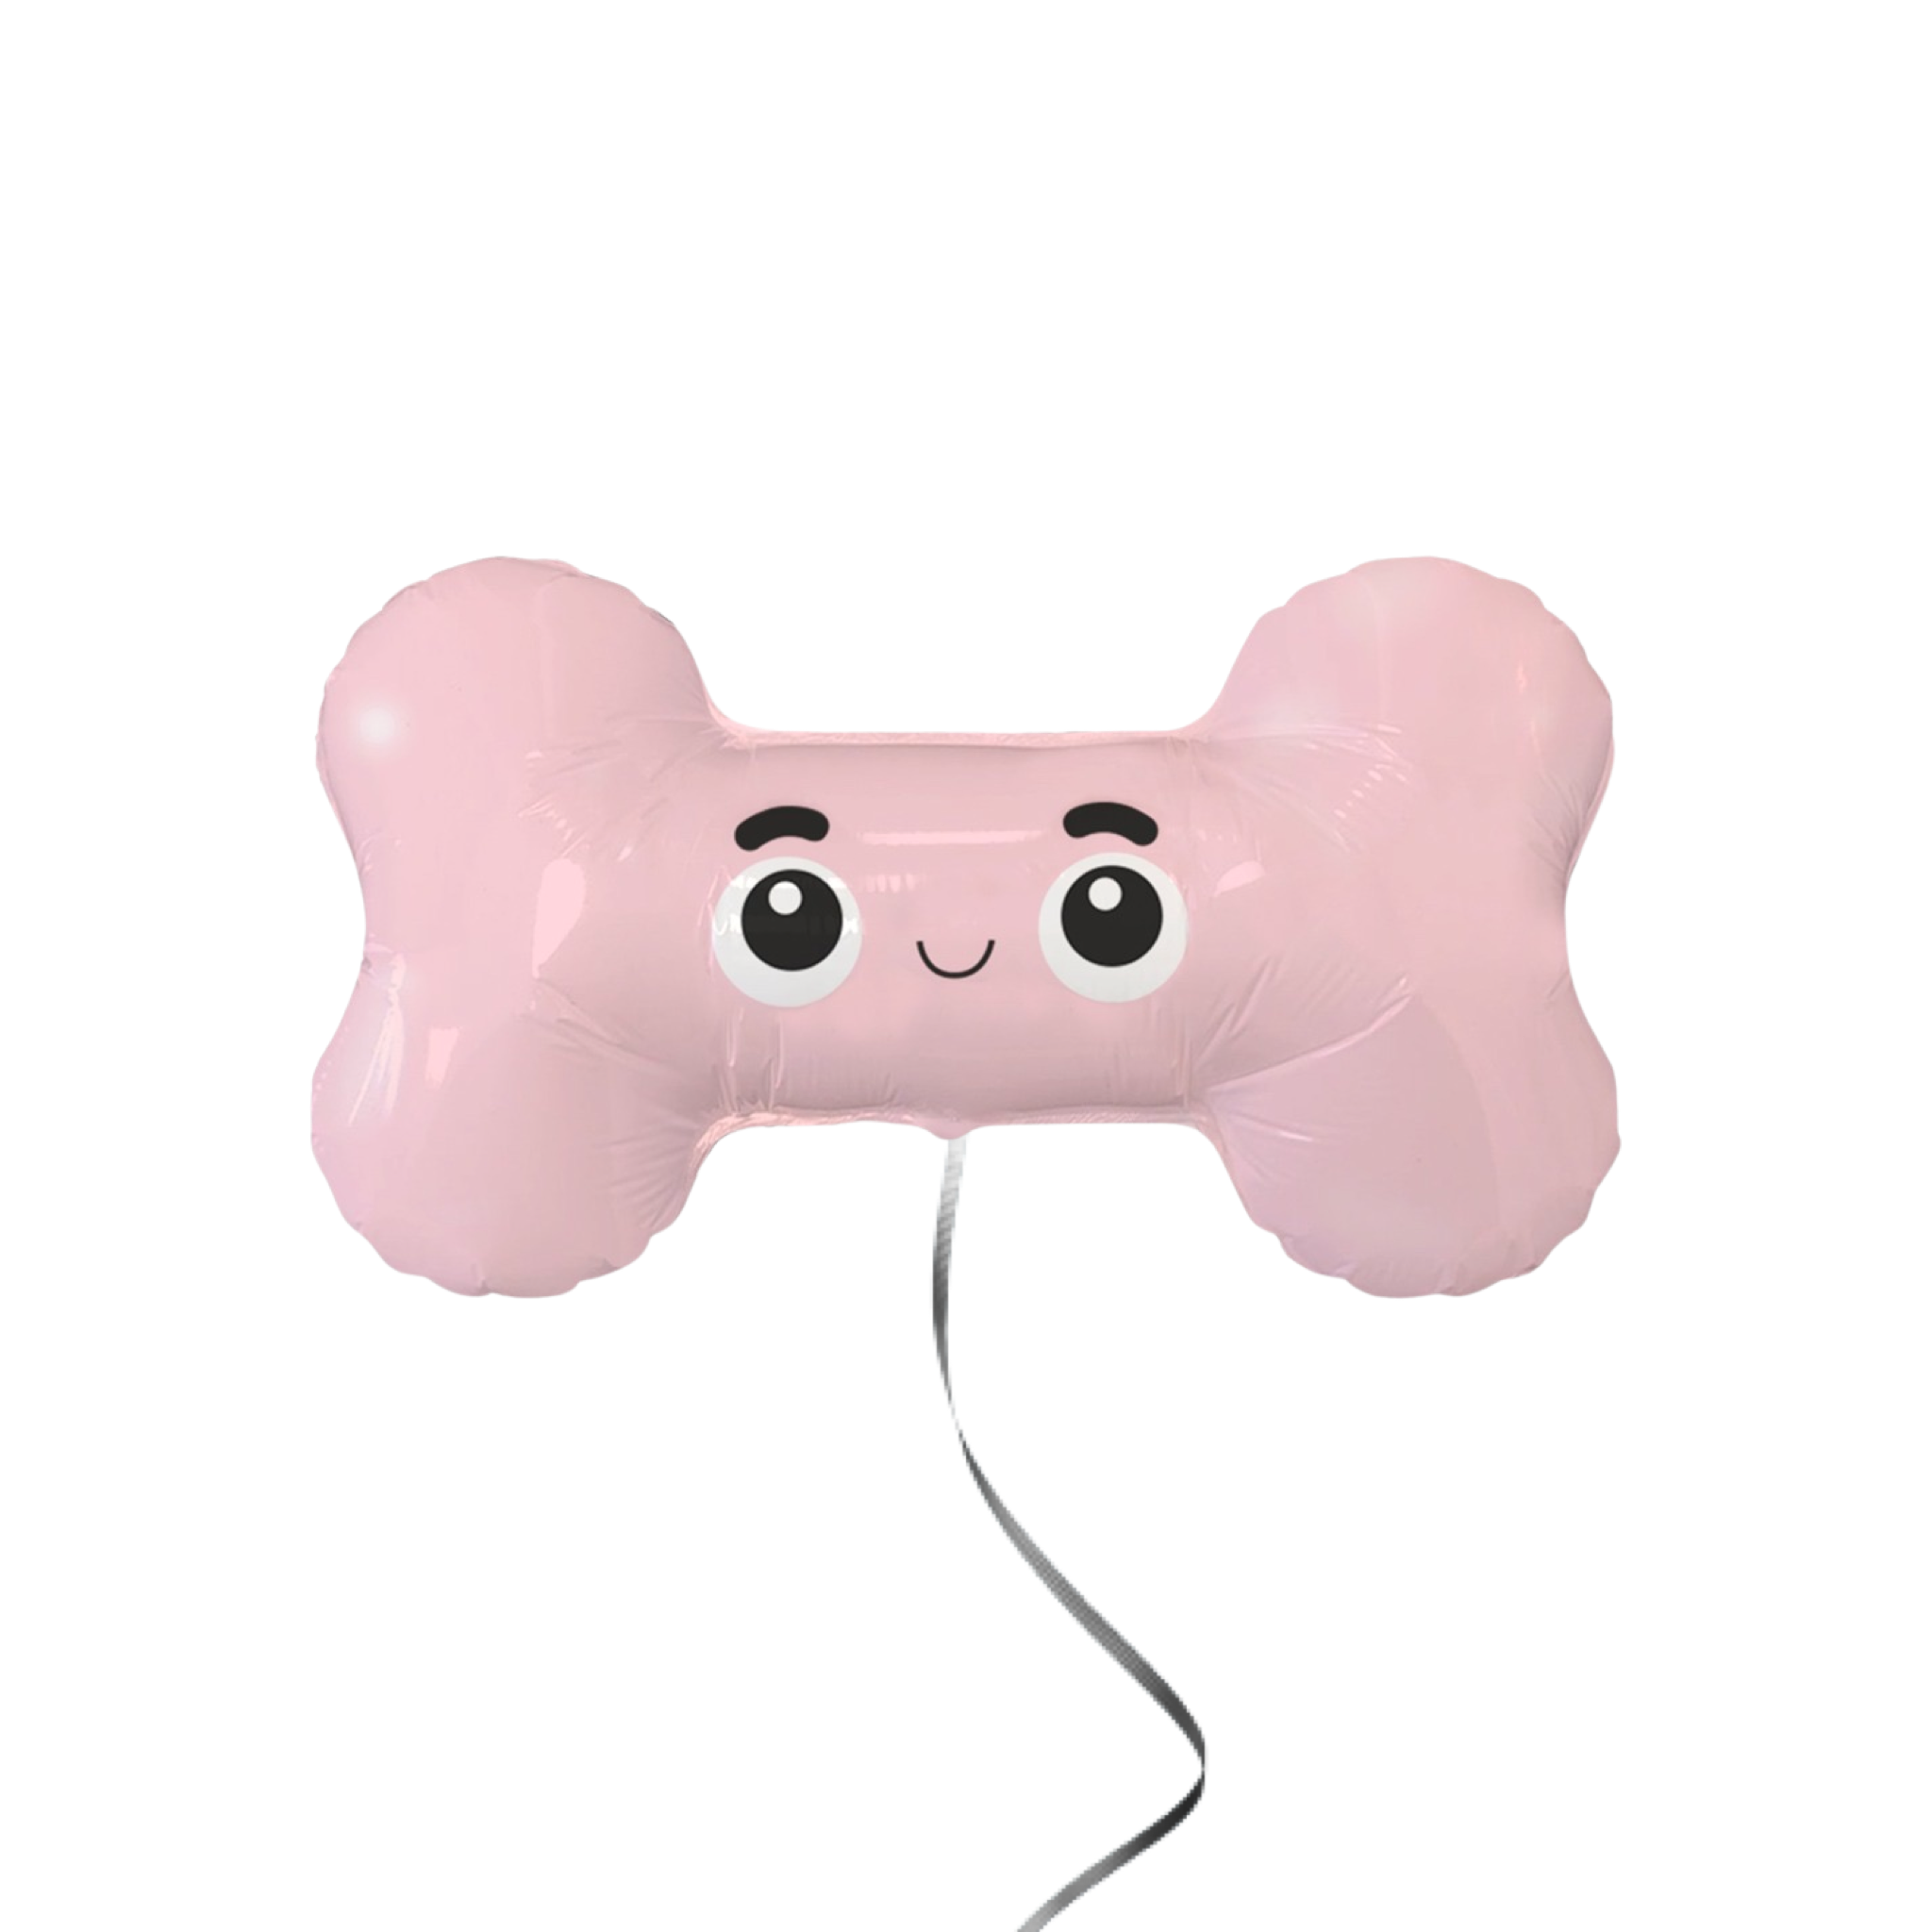 smiley face bone balloon available in light pink and light blue